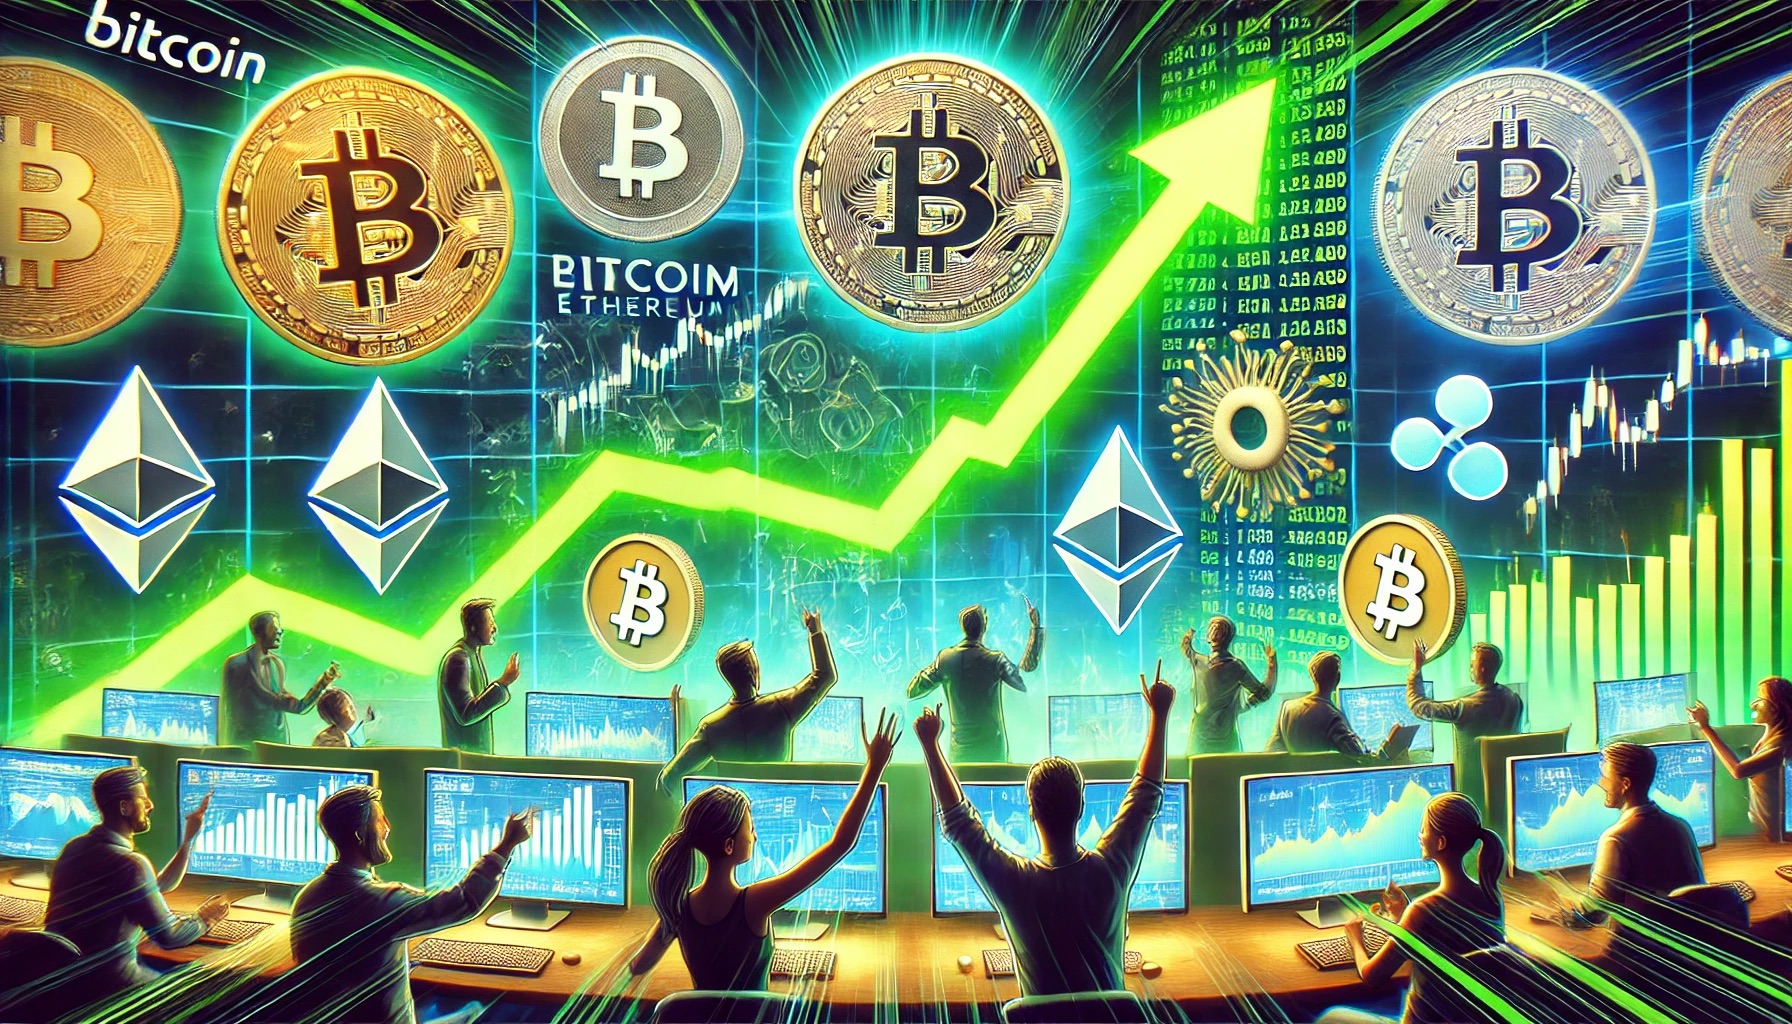 Don’t Get Shaken Out, Analyst Says Bitcoin And Altcoins Rally Is Just Starting